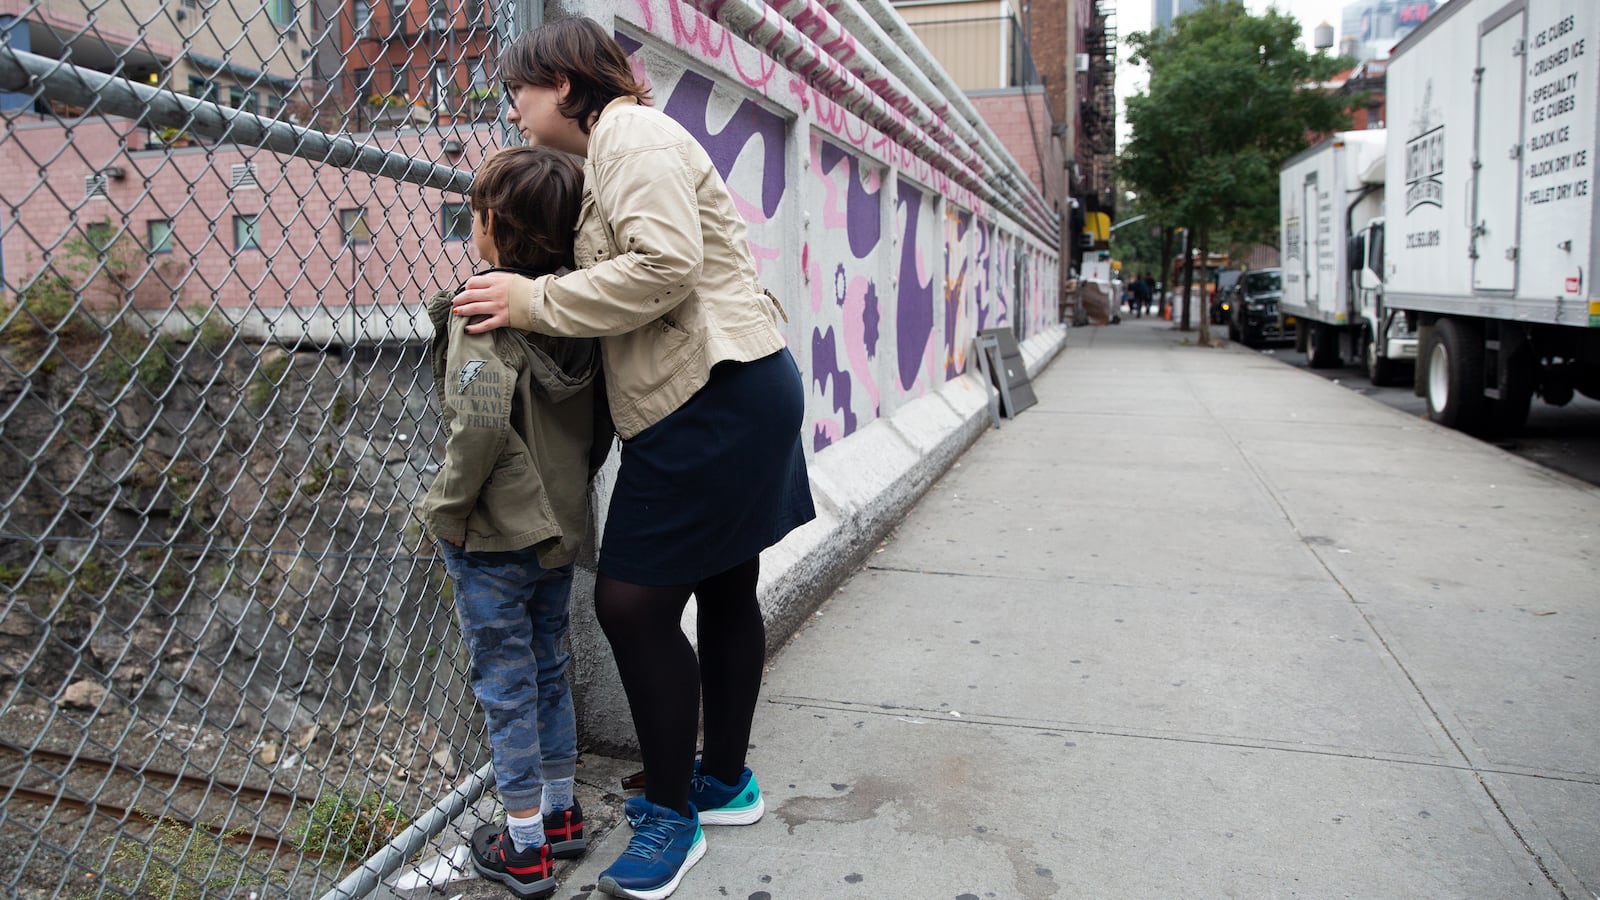 Eliyanna Kaiser and her seven-year-old son, who has autism, watch for Amtrak trains near their Hell’s Kitchen home, Oct. 14, 2019.